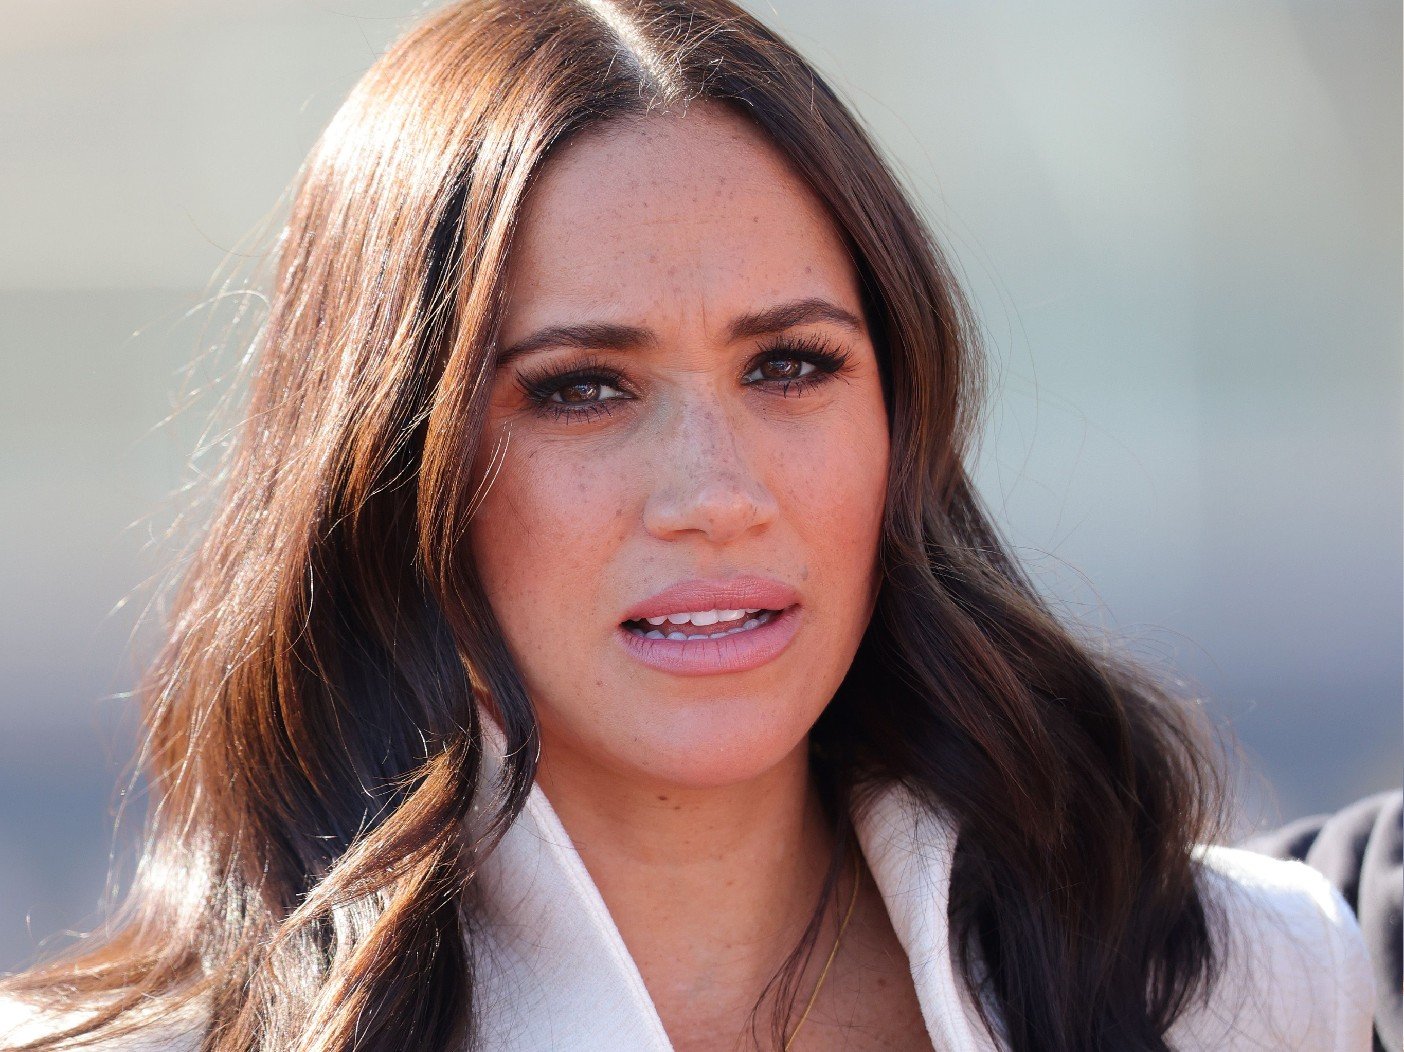 Tabloid Reports that Meghan Markle is Furious at Prince Harry Over Supposed ‘Inappropriate’Texts